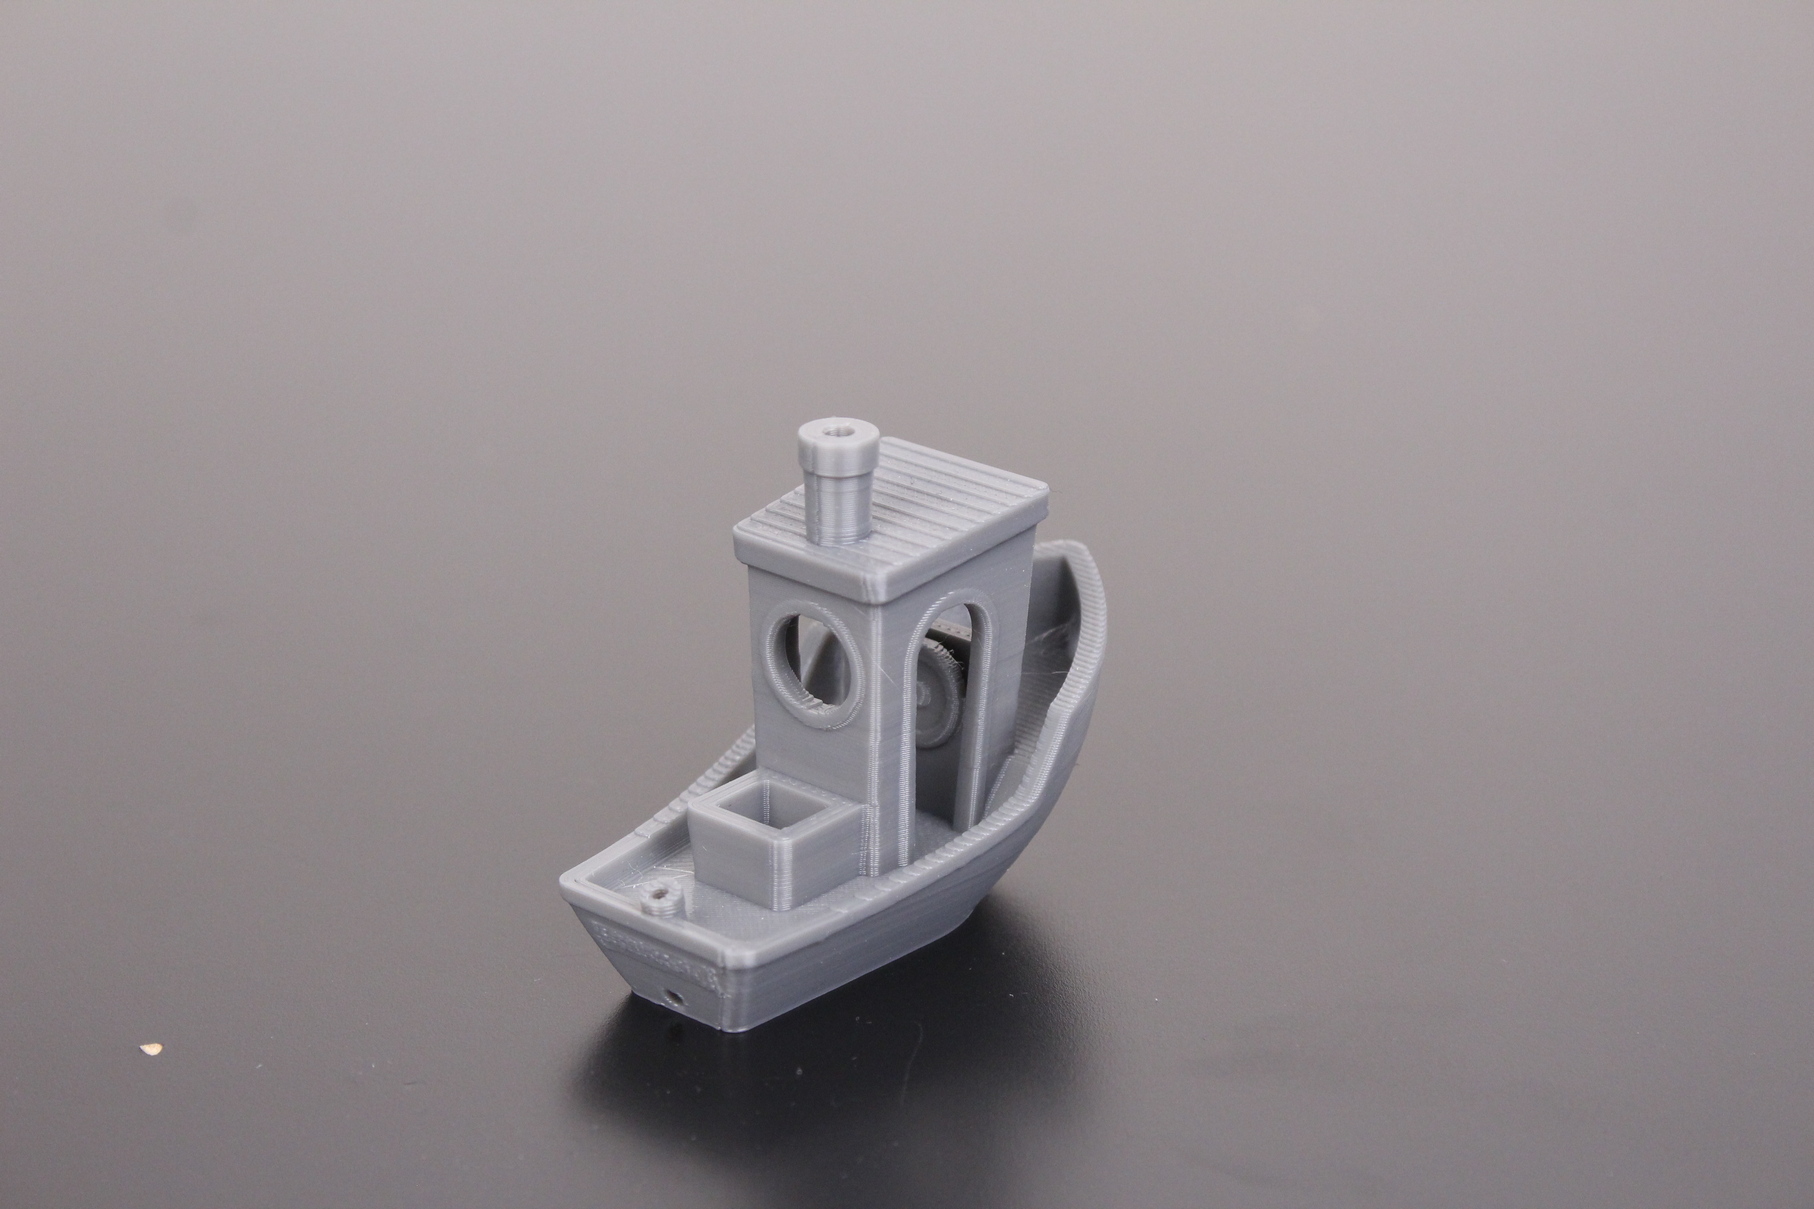 Voxelab Aries Review 3DBenchy pritned in PLA 5 | Voxelab Aries Review: A Worthy Upgrade for the Aquila?